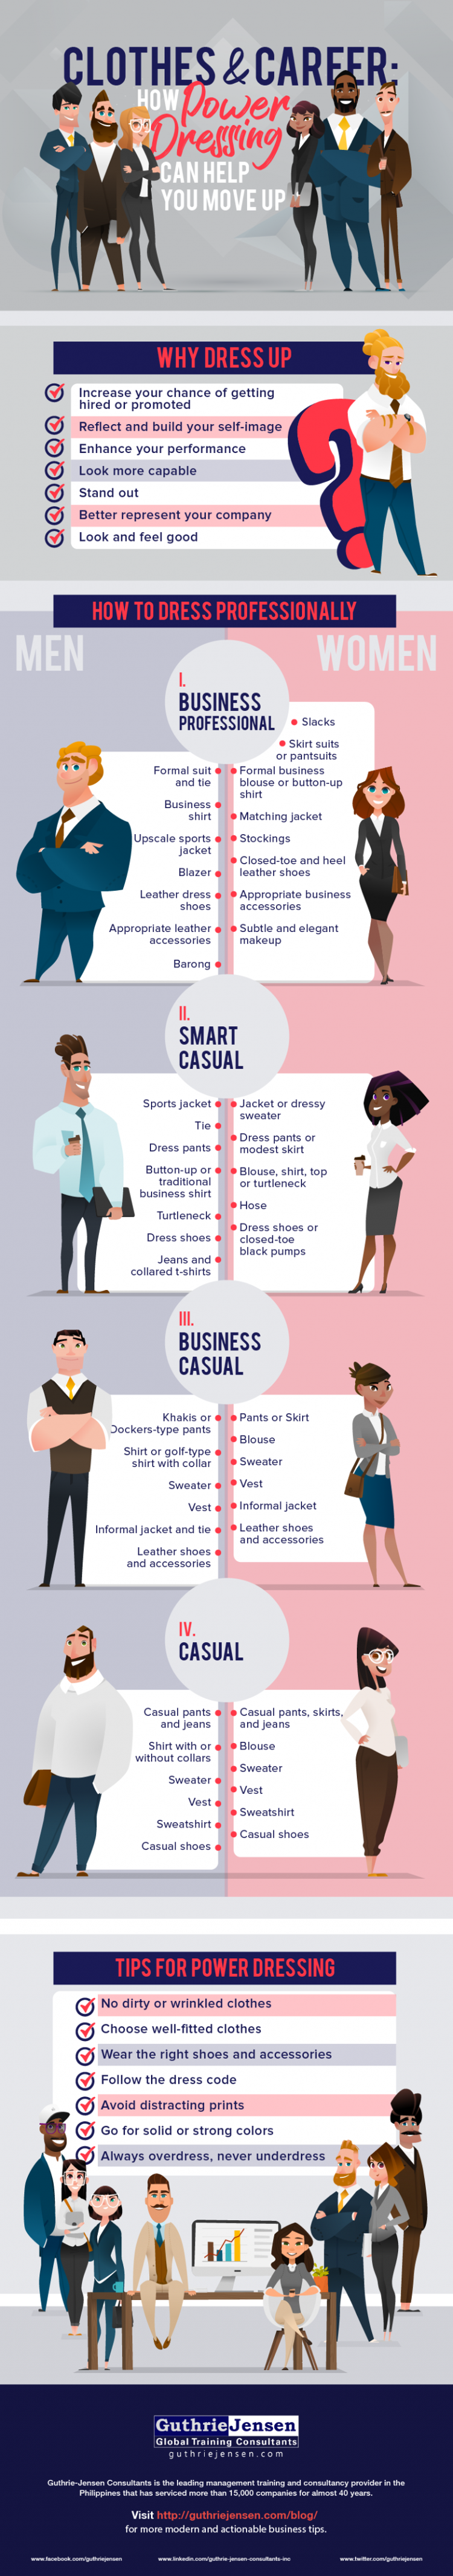 [Infographic] Clothes and Career: How Power Dressing Can Help You Move Up